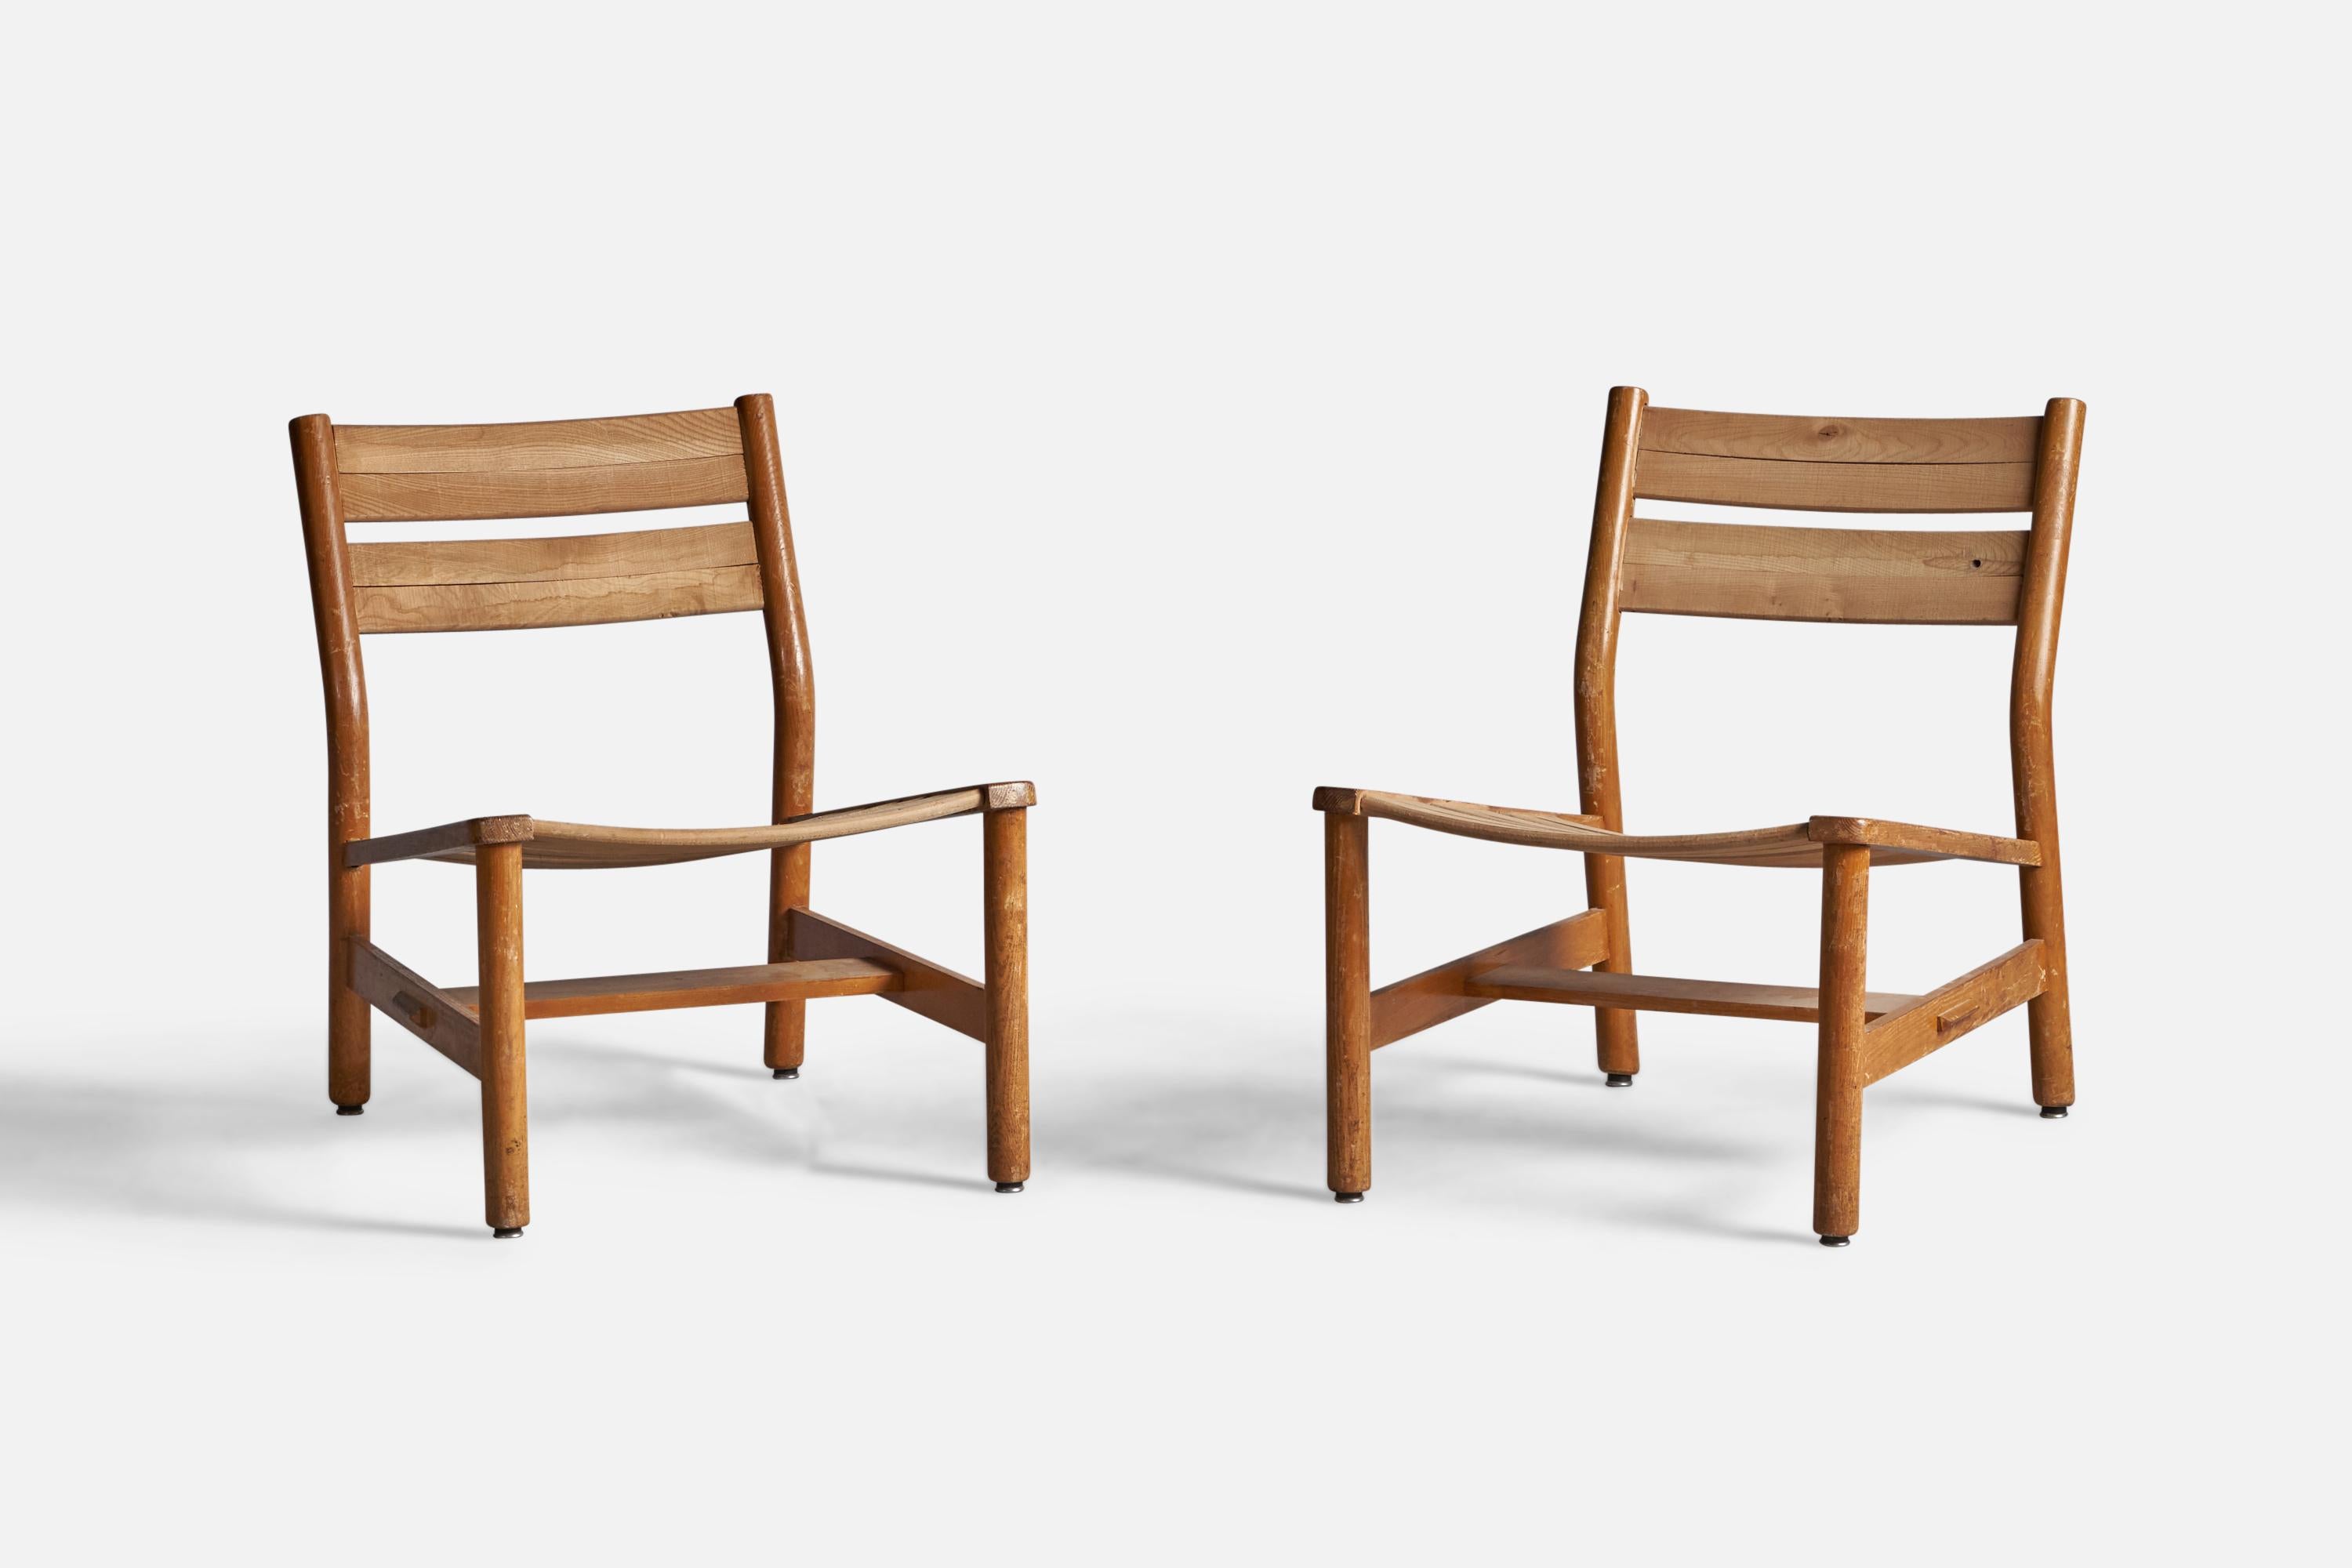 A pair of oak slipper chairs designed and produced by Pierre Gautier Delaye, France, c. 1950s.

14.75